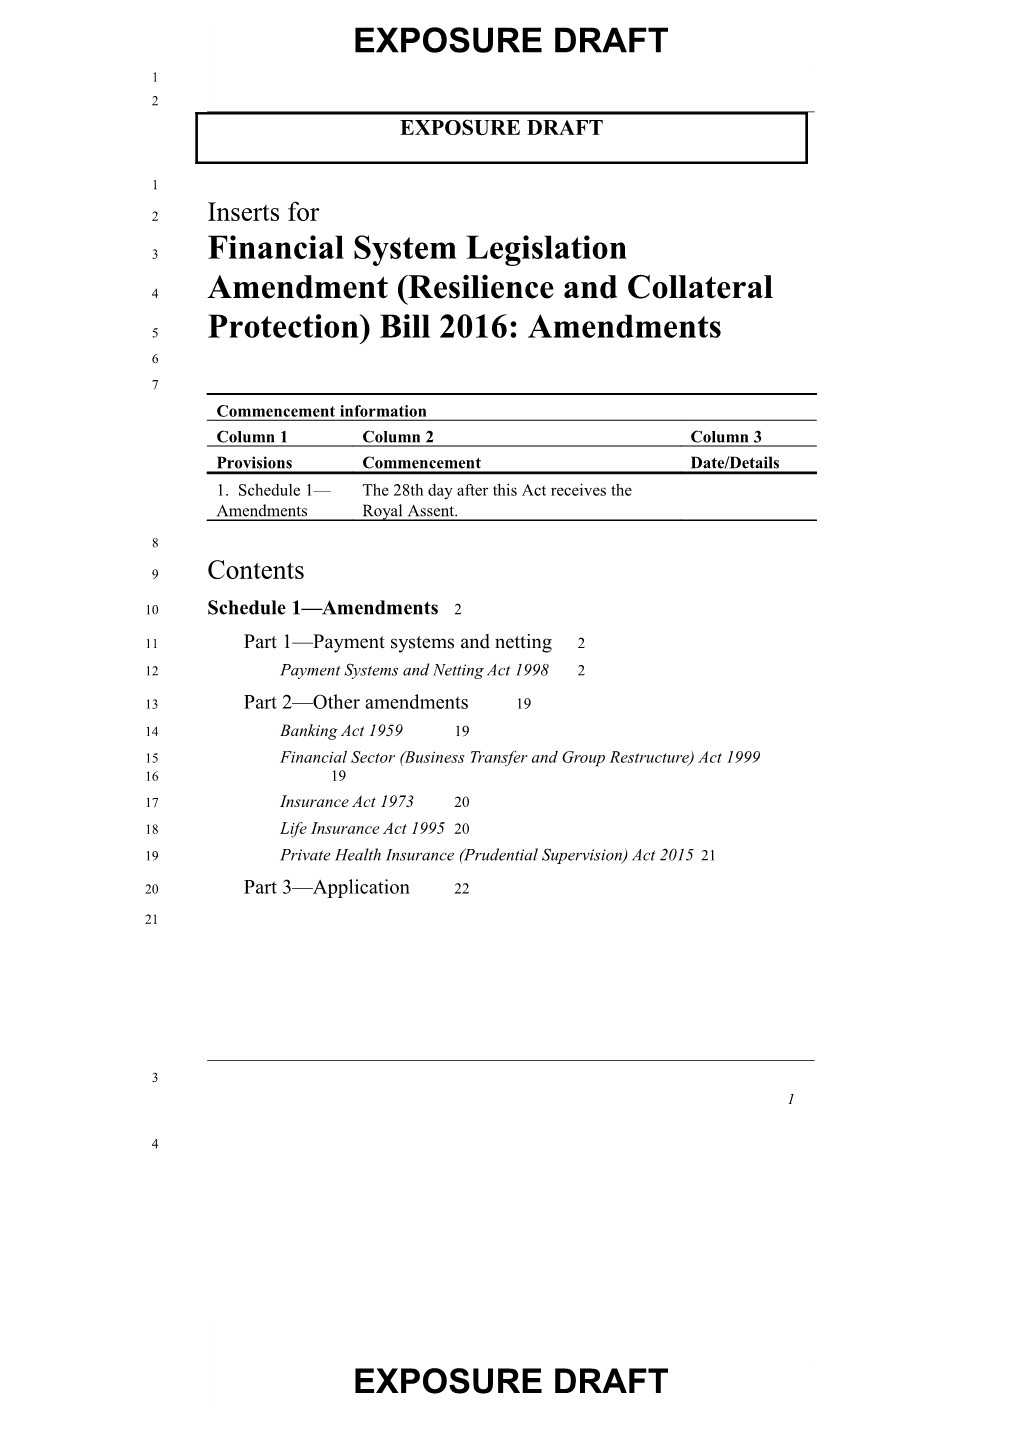 Financial System Legislation Amendment (Resilience and Collateral Protection) Bill 2016